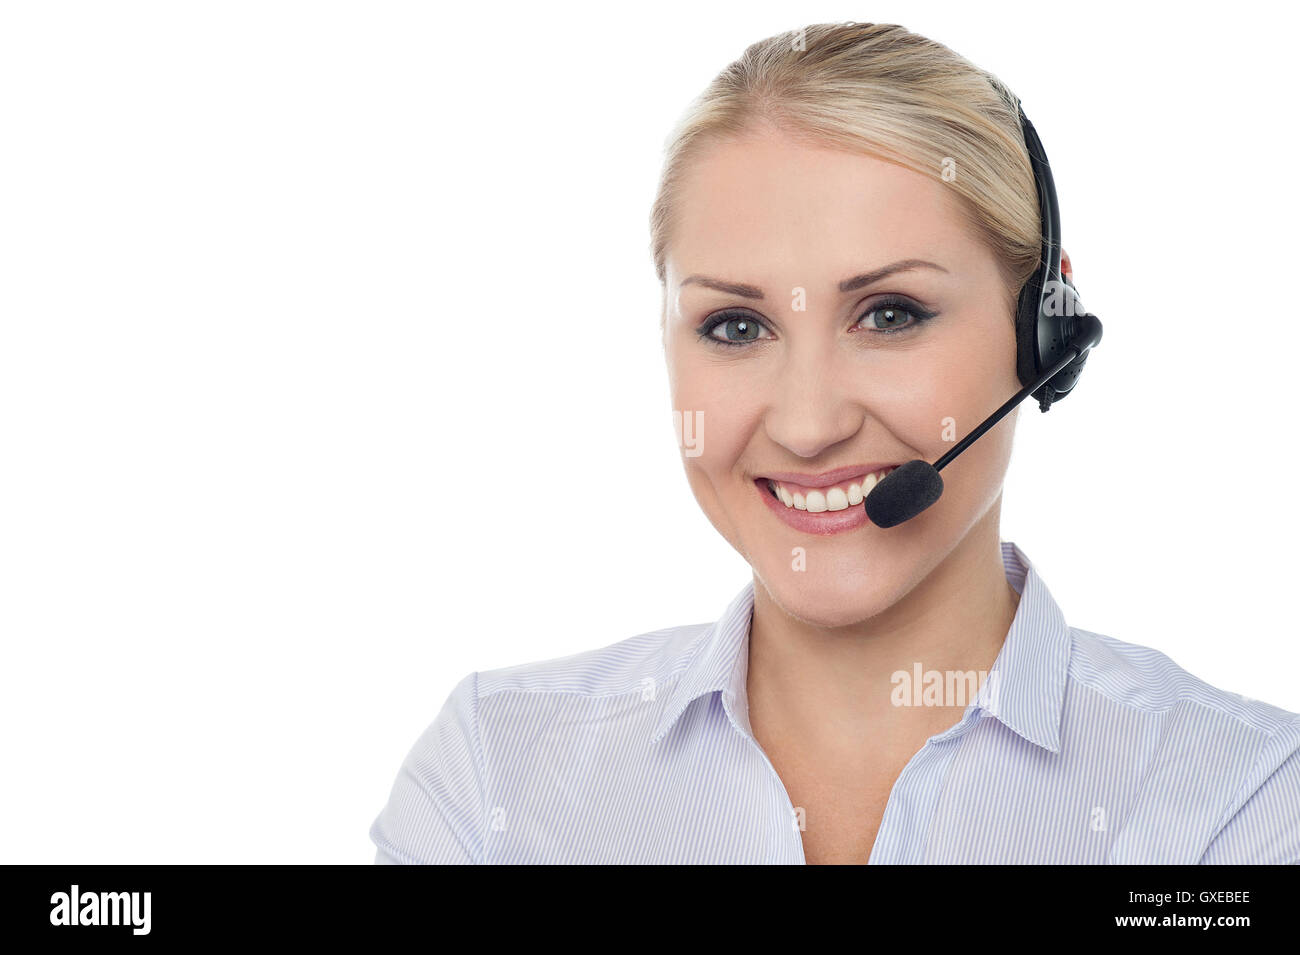 Portrait of female customer support executive Banque D'Images